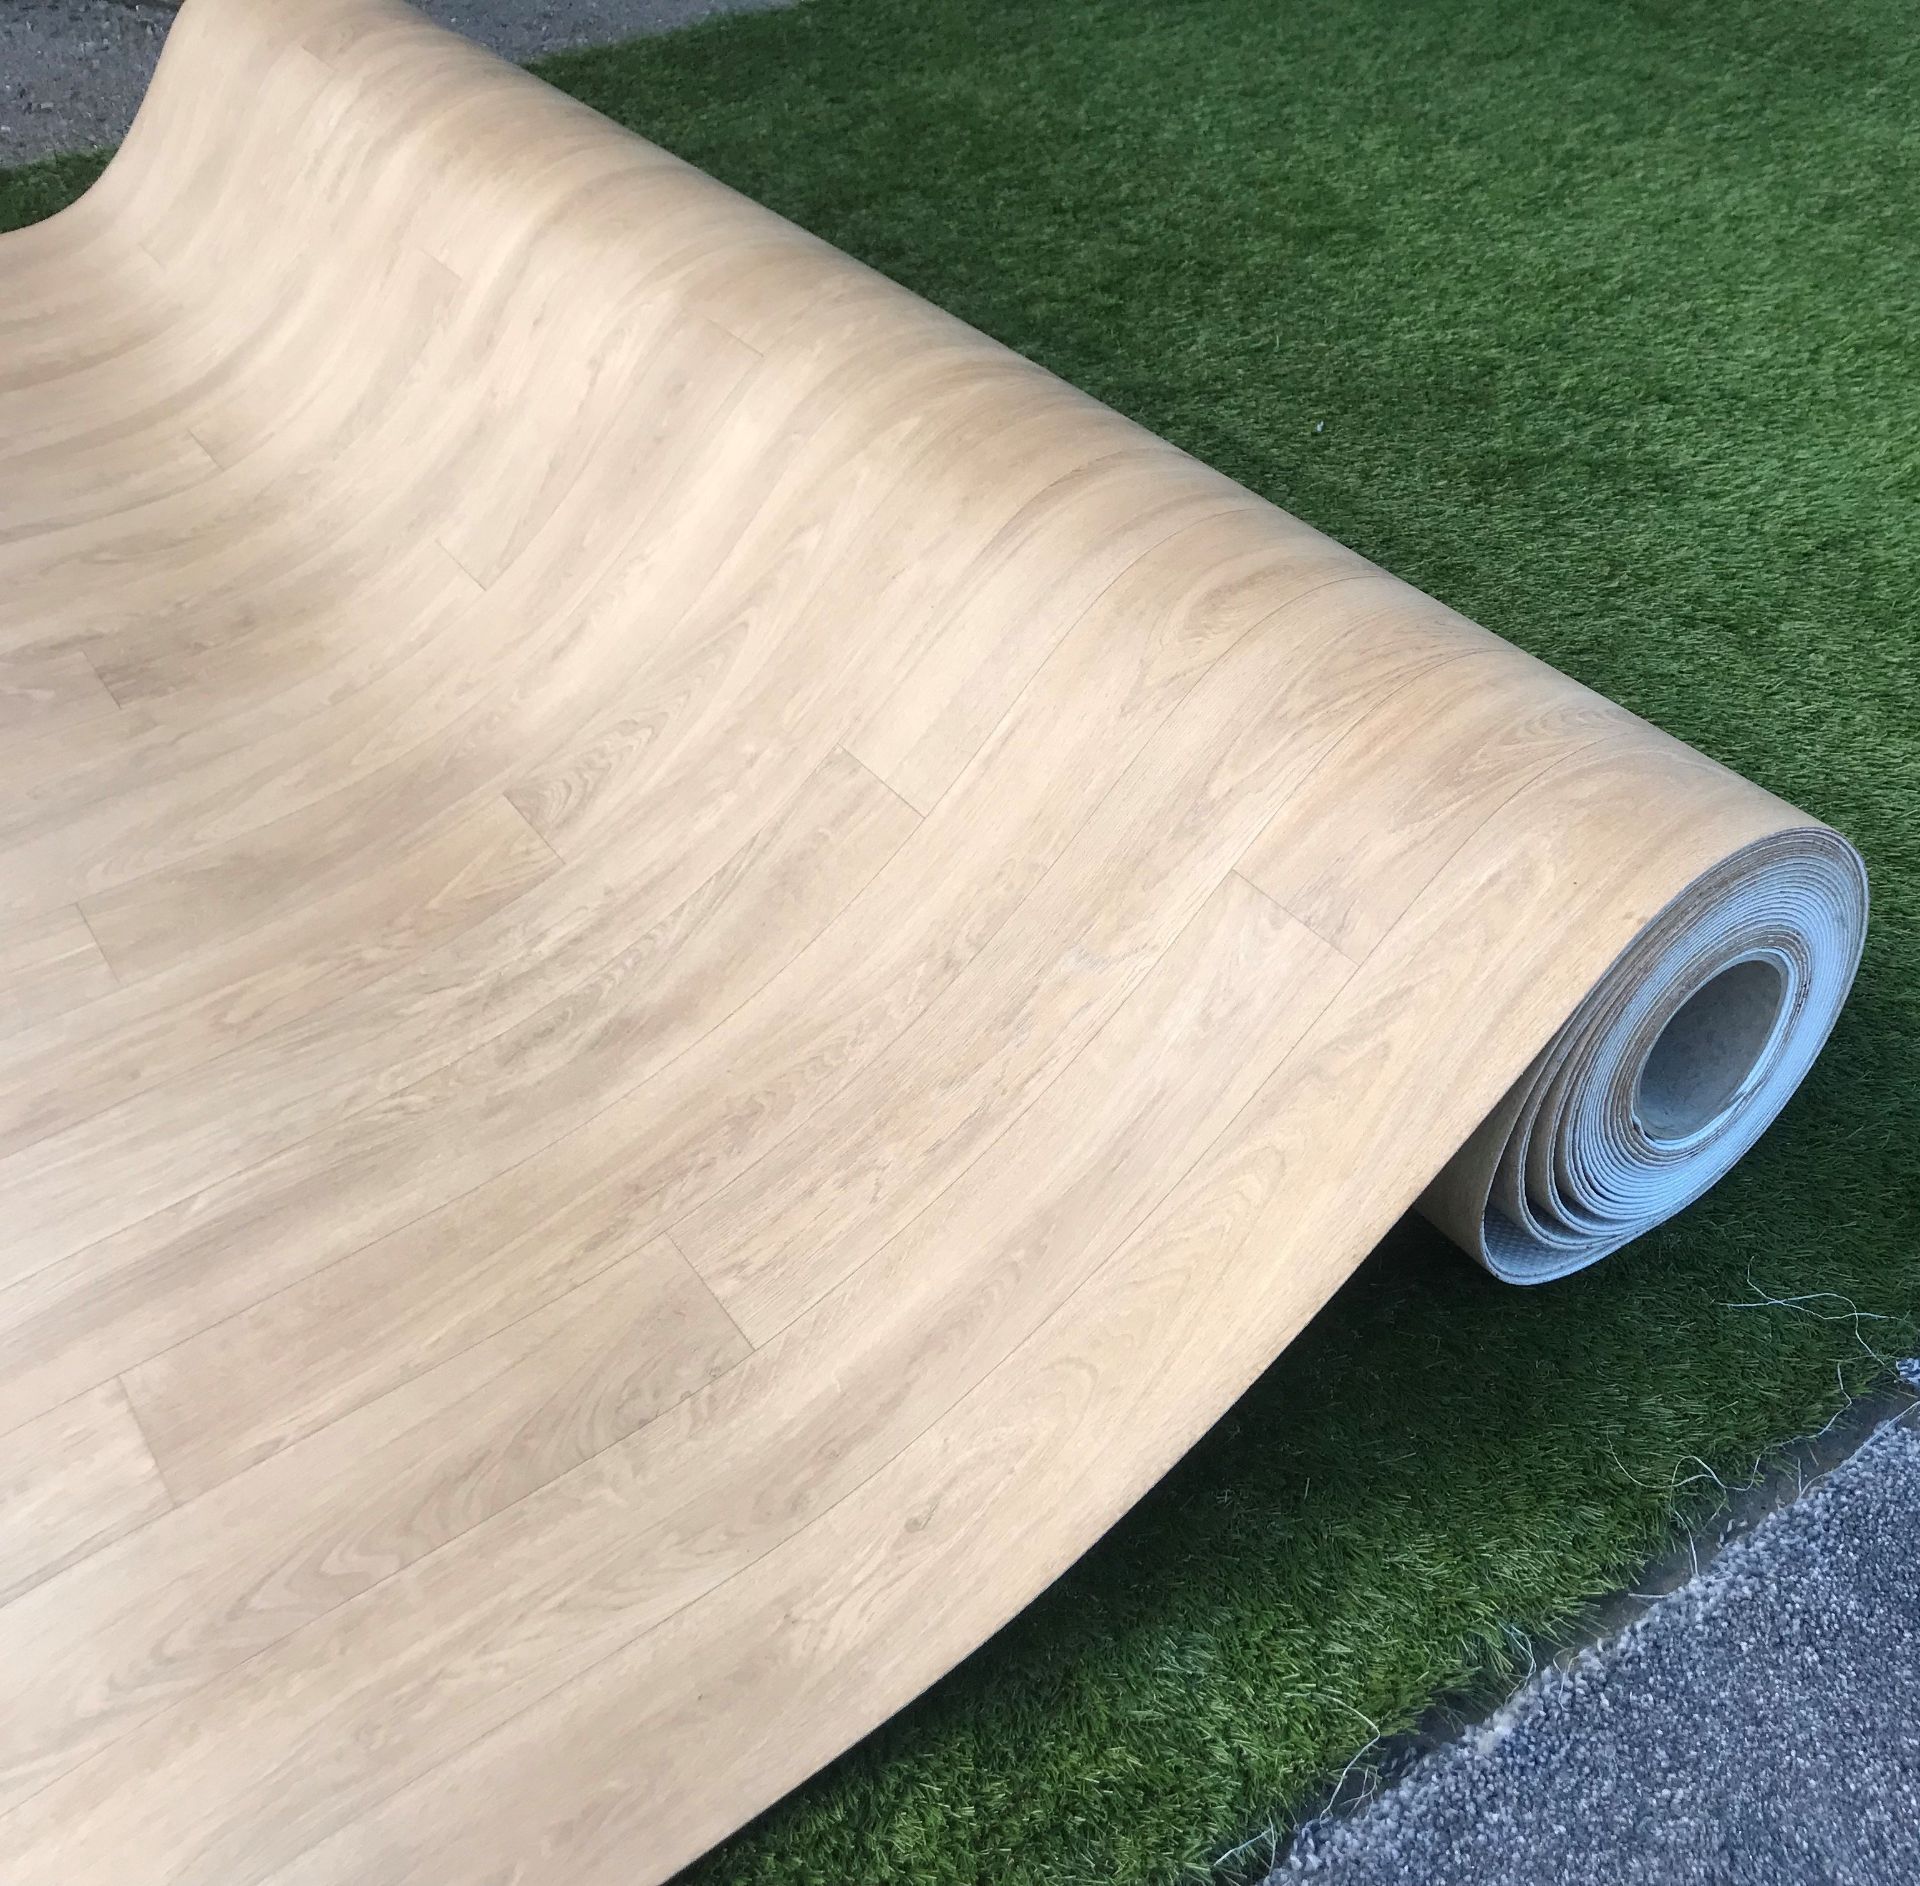 1 x ALTRO Altro Woodsafe Safety Flooring - Colour Natural Oak - 20X2 Meter Roll - Ref: NWF016 - - Image 3 of 4